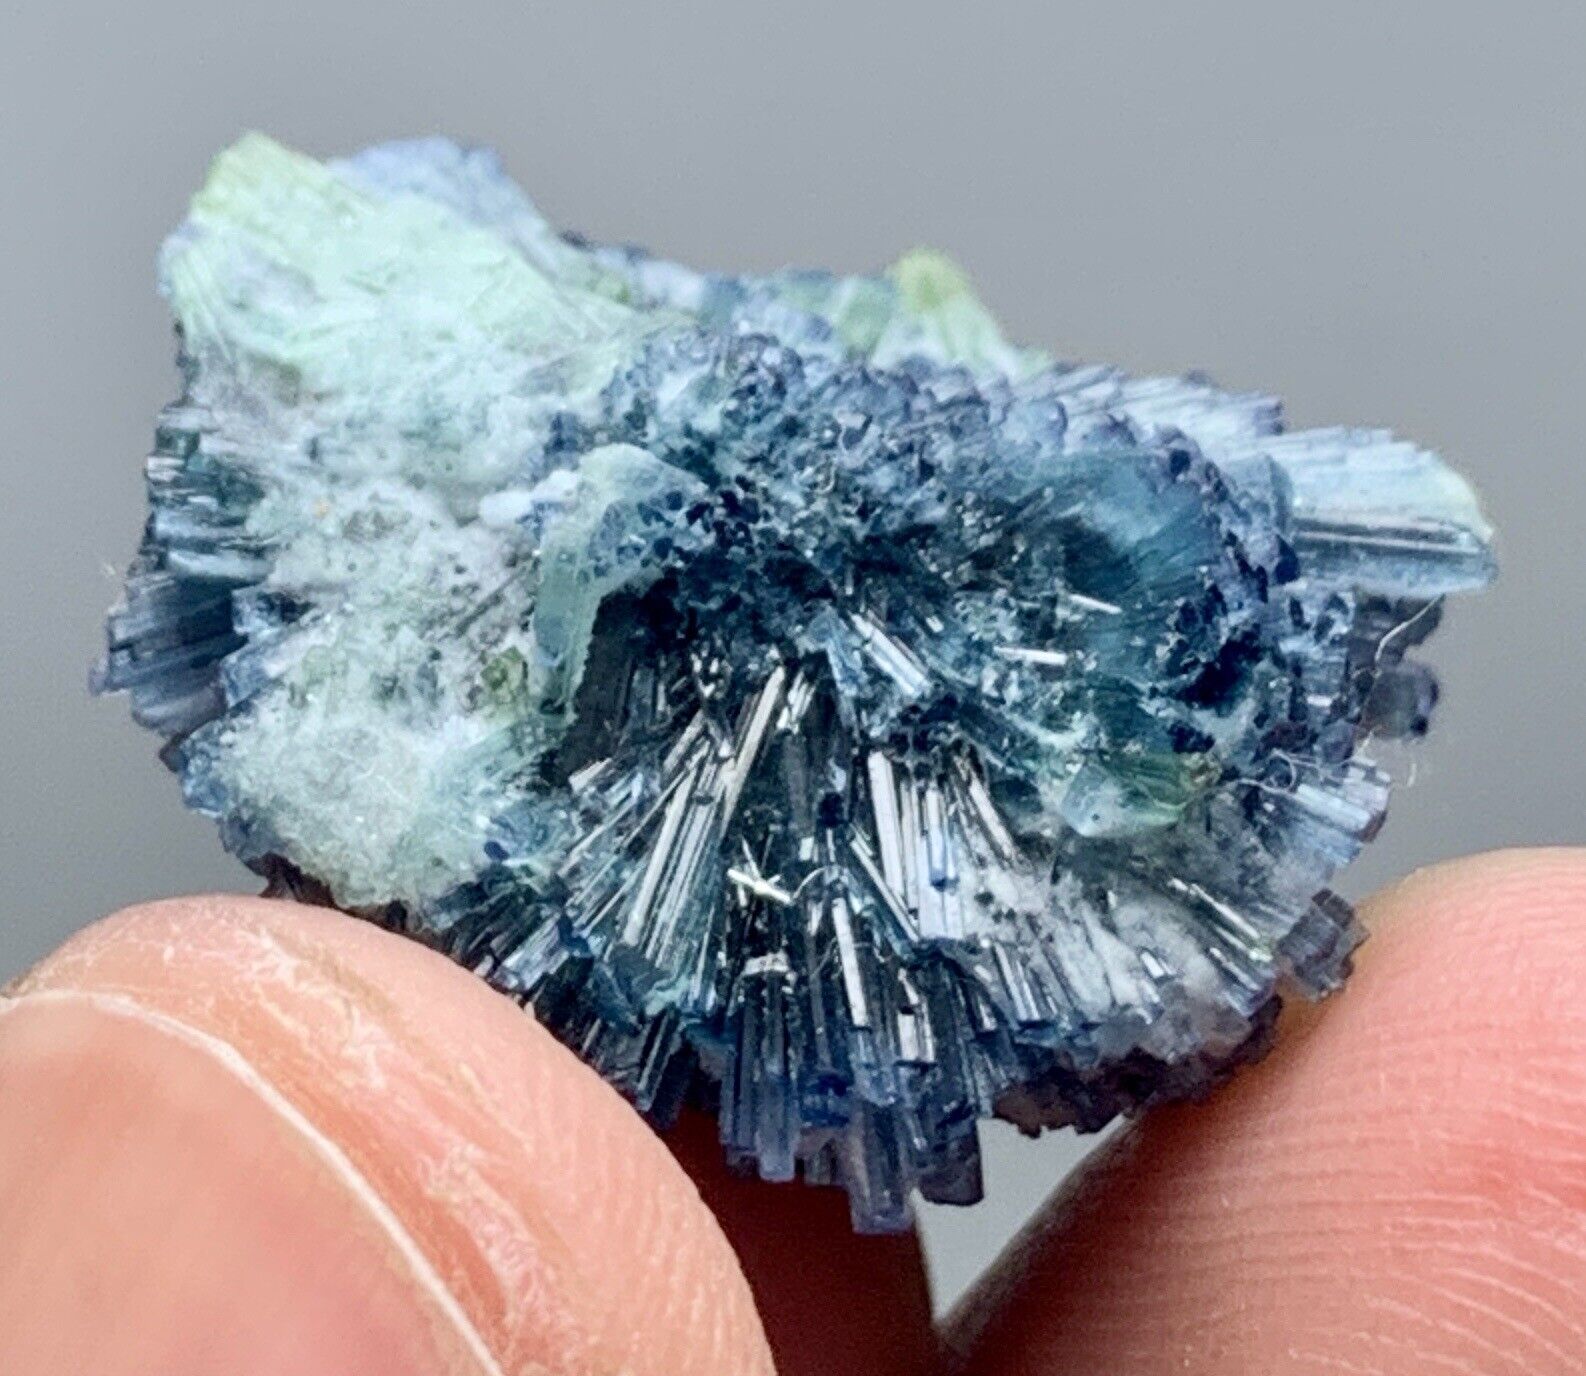 26  Carat Indicolite Colour Tourmaline Crystal With Specimen From Afghanistan